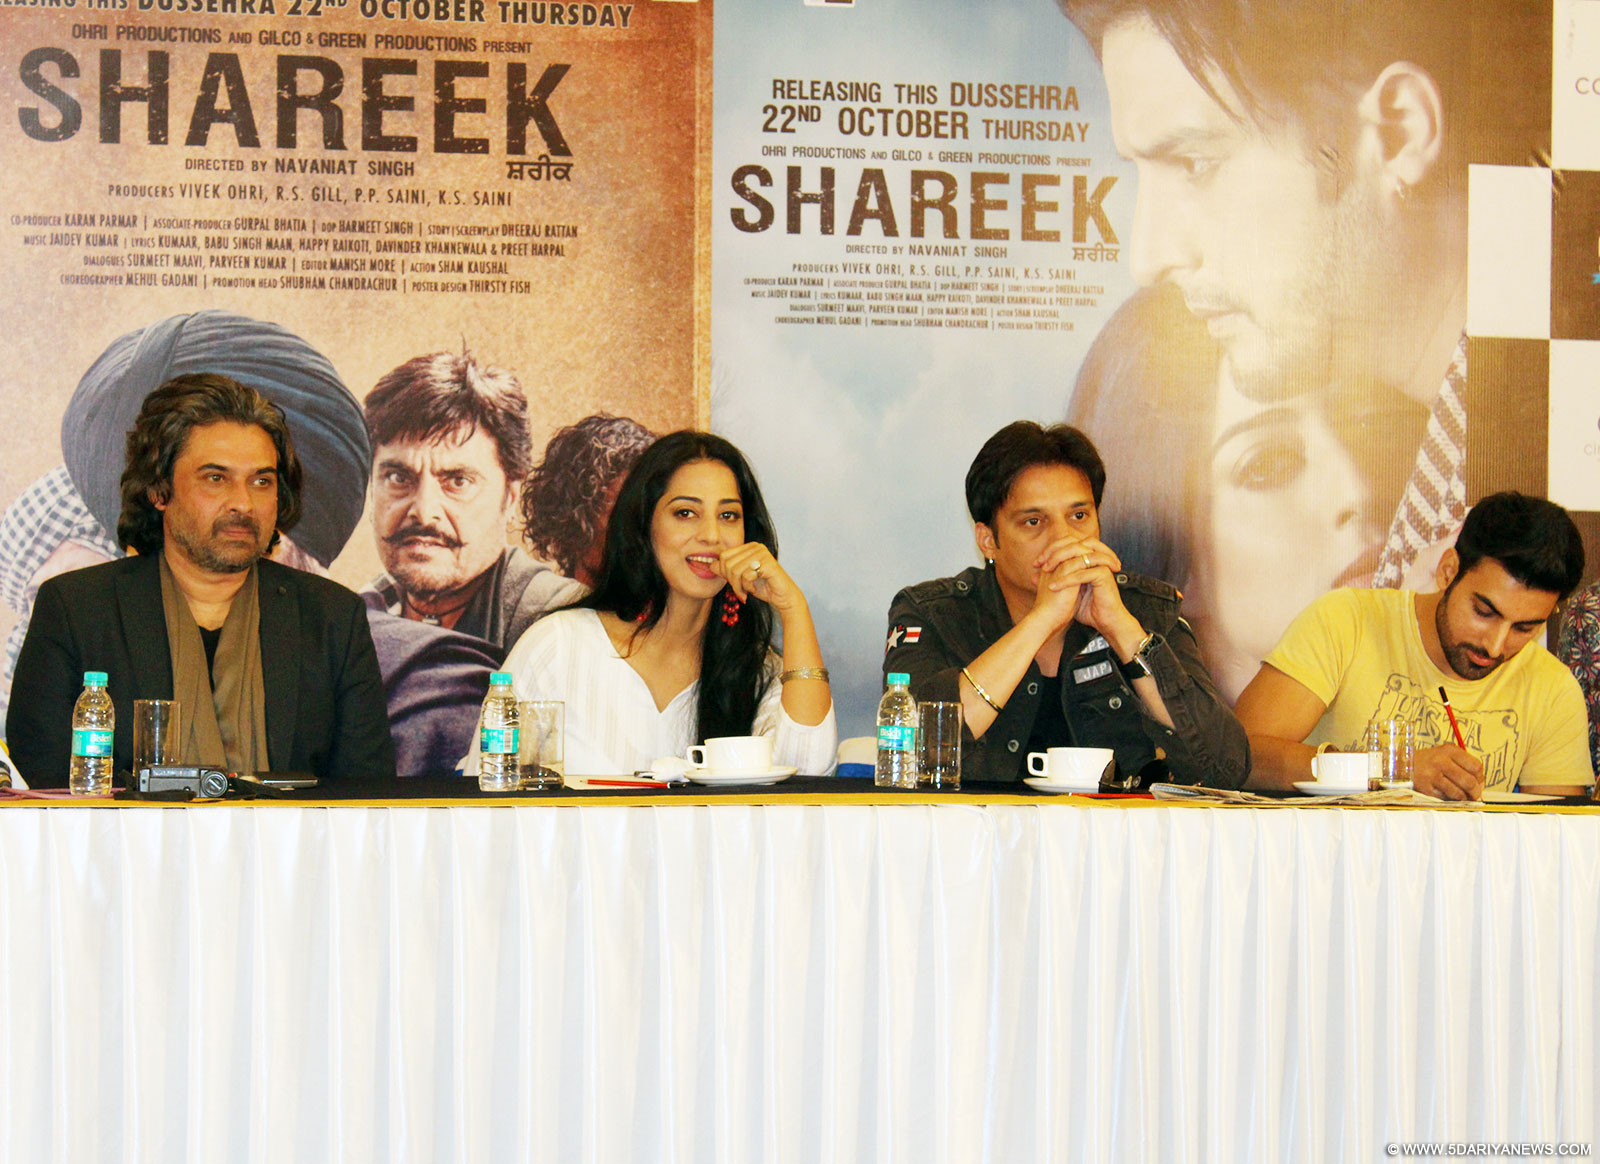 Theatrical trailer of ‘Shareek’ formally released